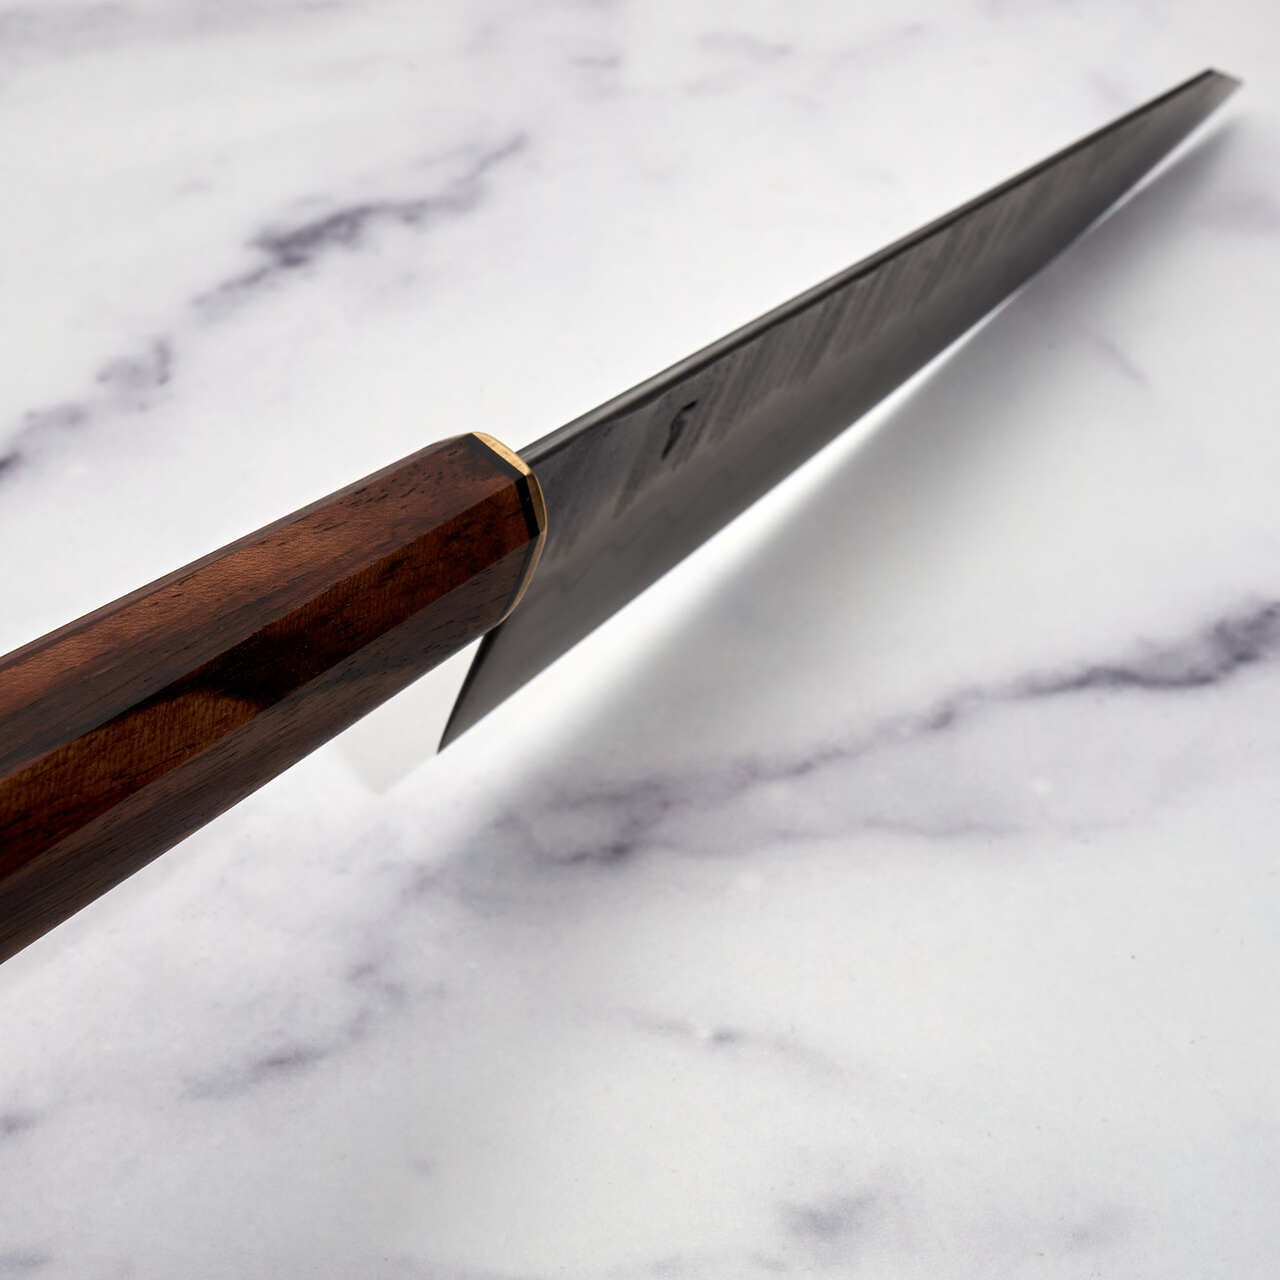 MCX K-Tip Gyuto 250mm 26c3 Limited Release by Fredrik Spåre - 2nd Edition - Spine